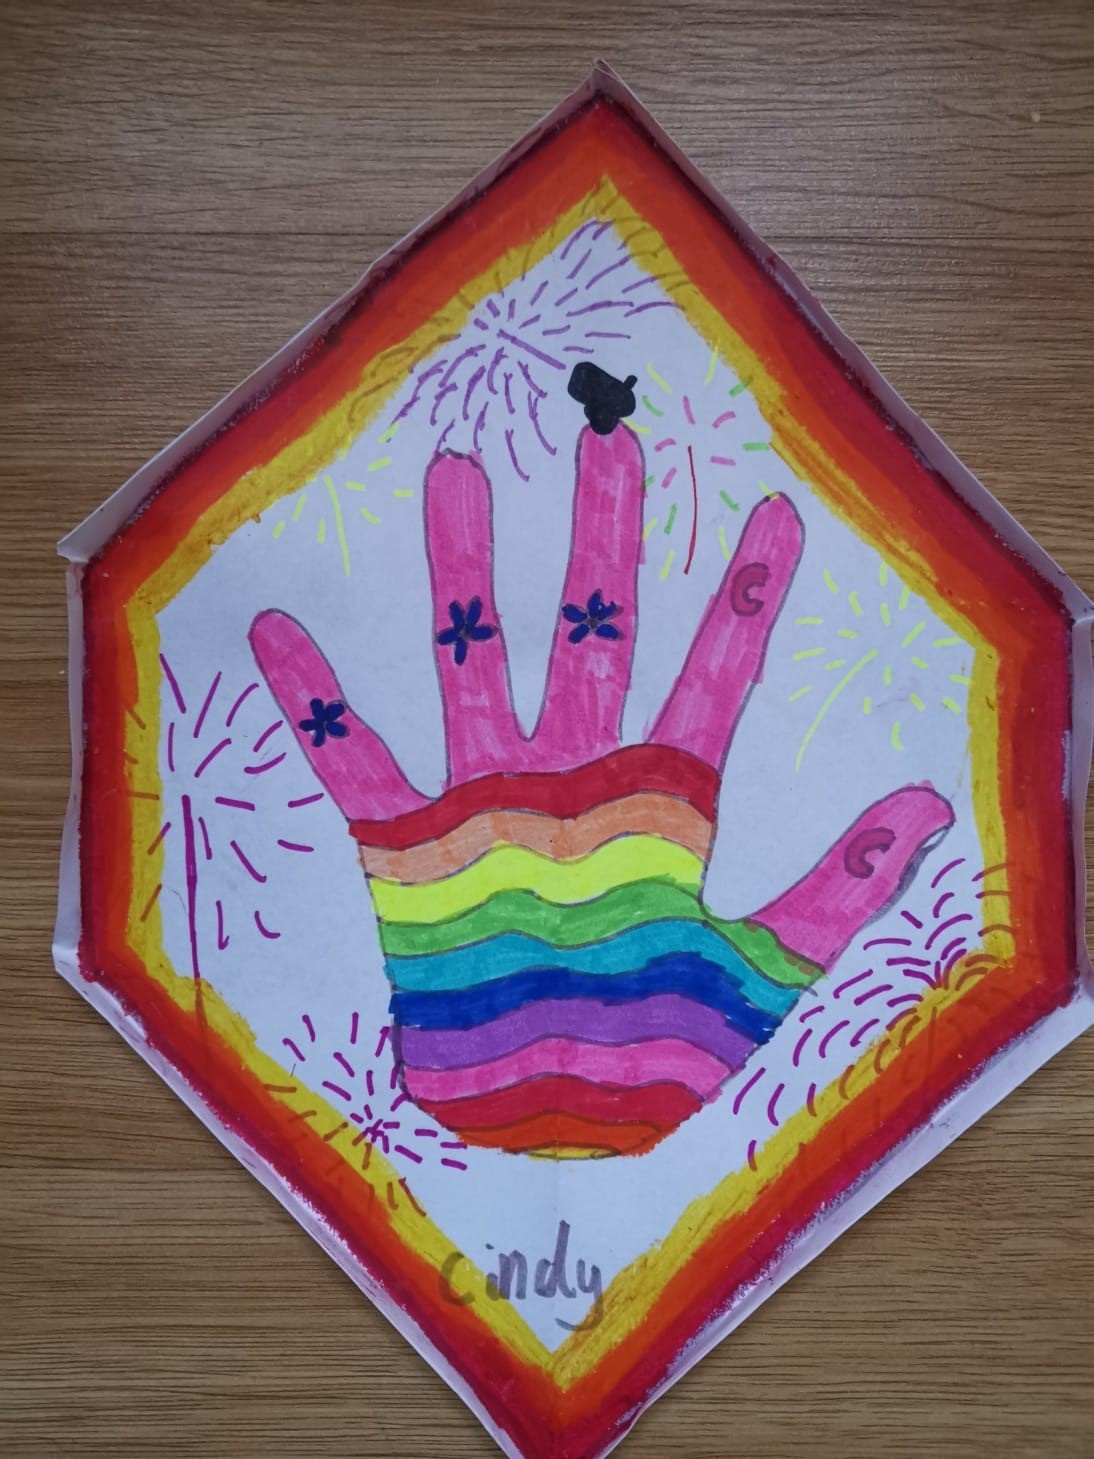 A brightly coloured hand by Cindy